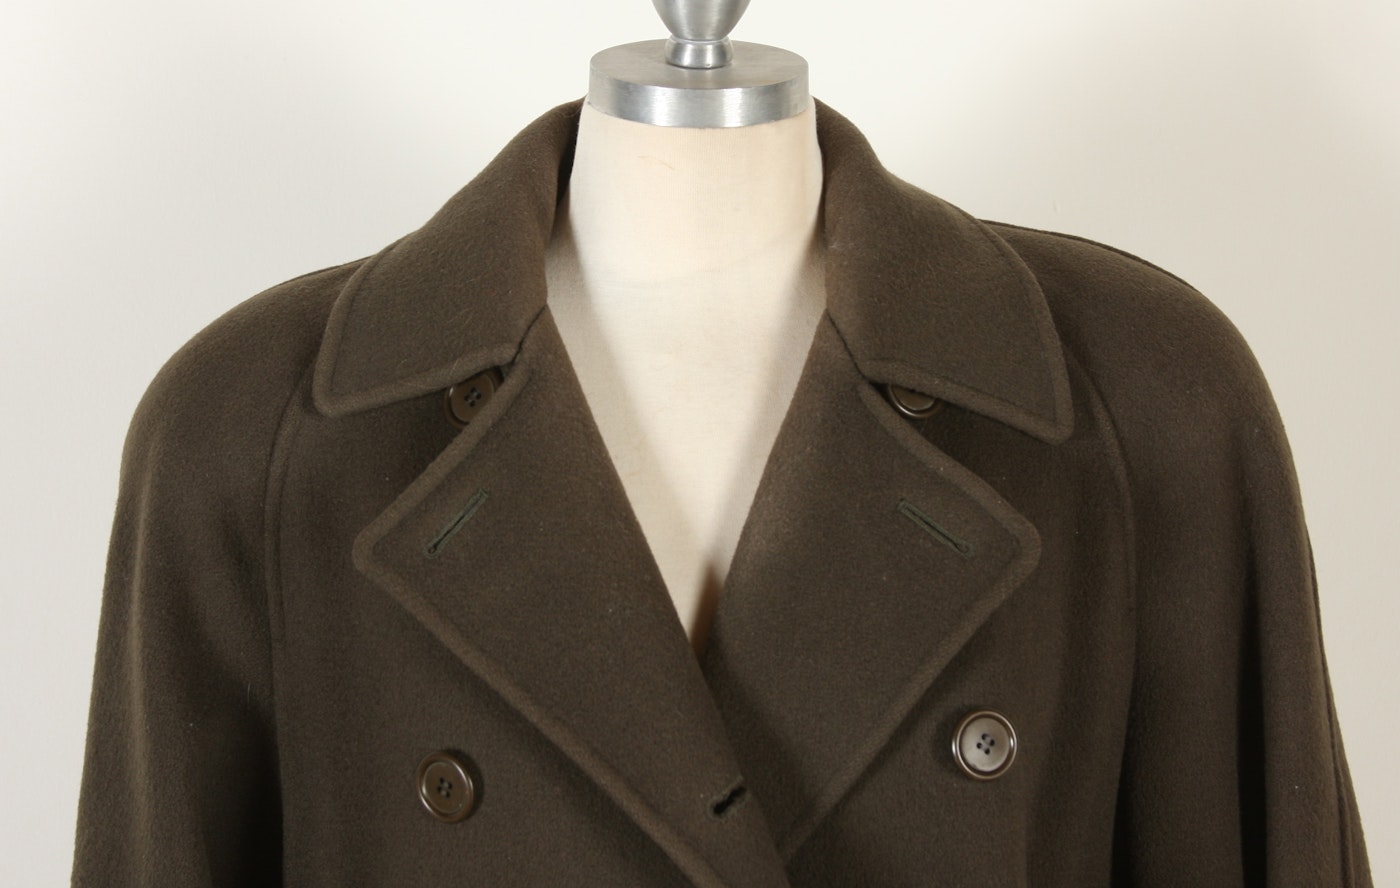 Perry Ellis Portfolio double breasted olive green wool overcoat | EBTH